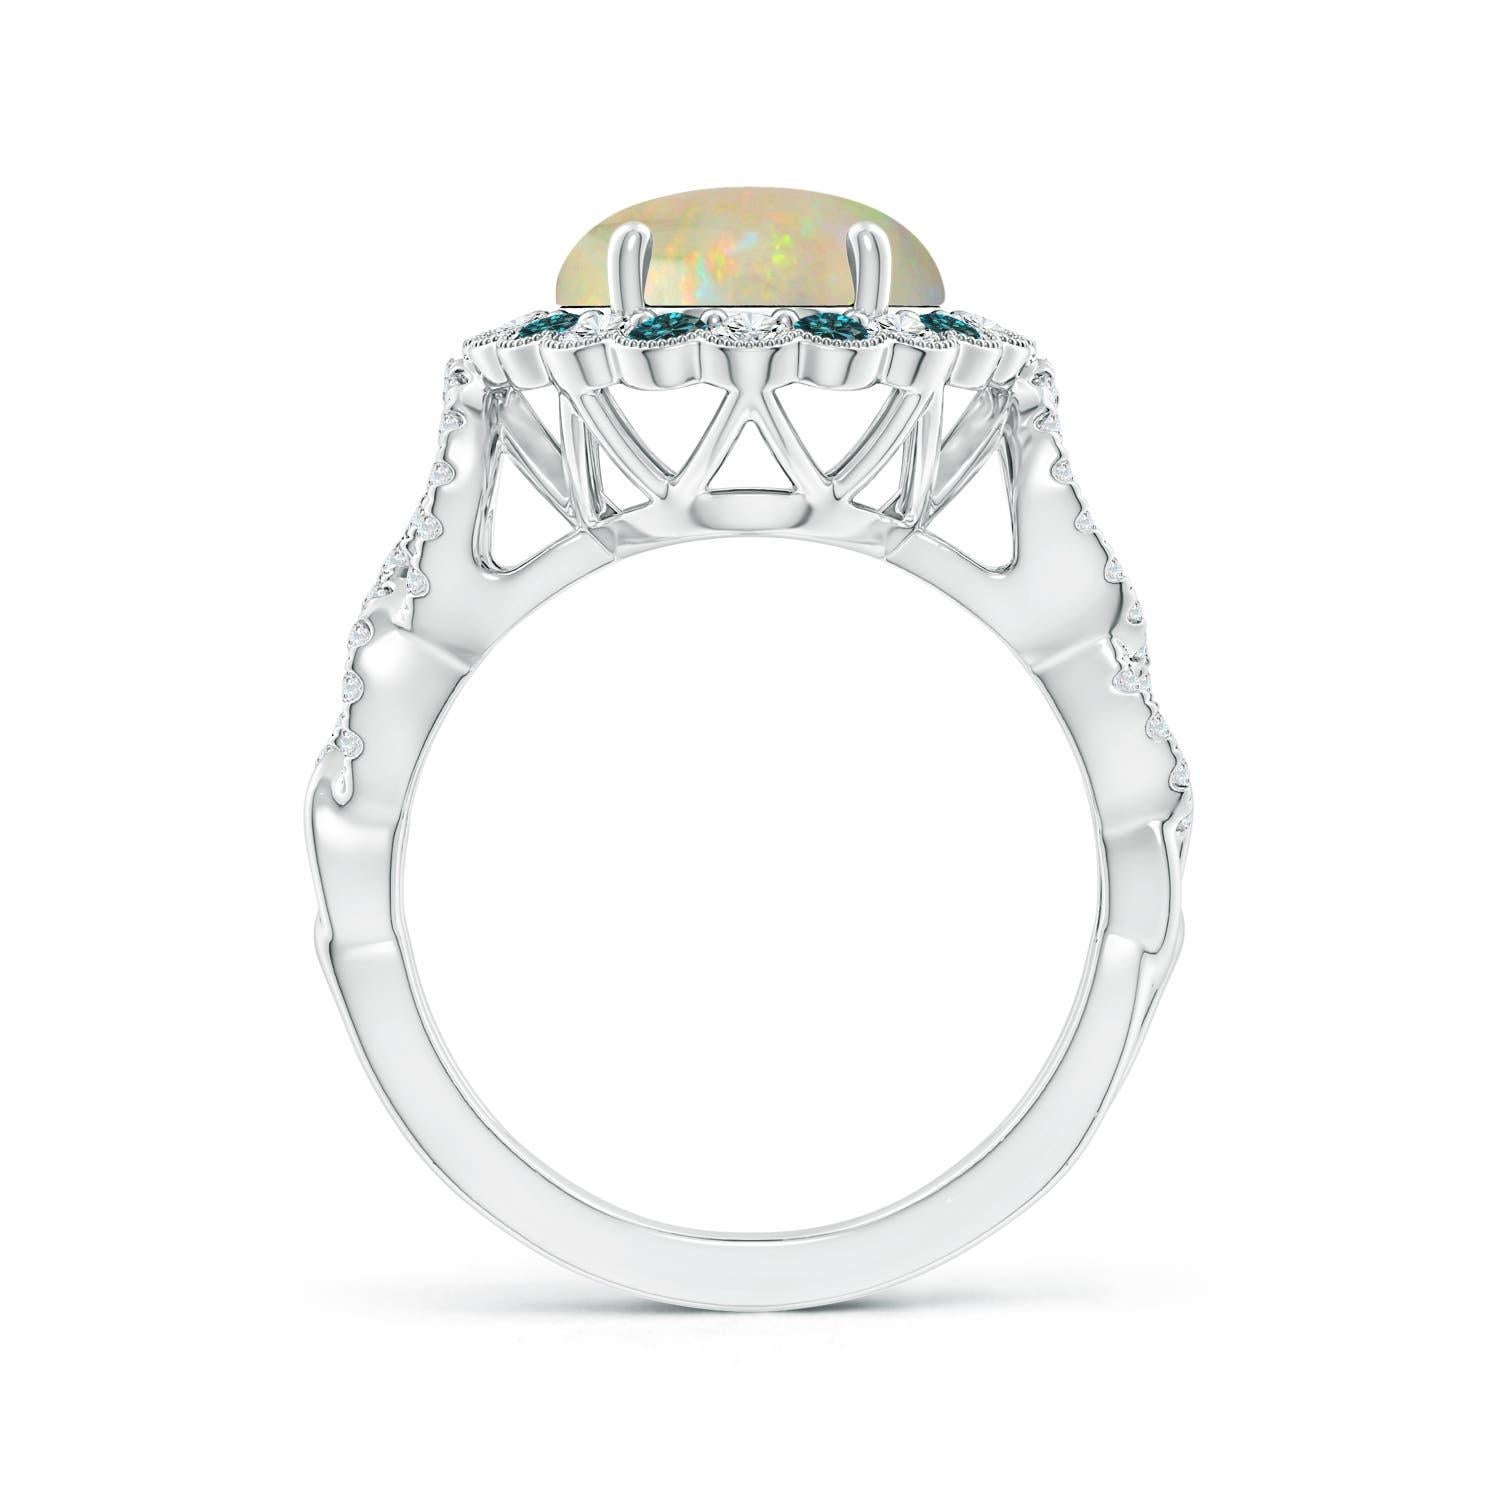 For Sale:  GIA Certified Natural Opal Ring in White Gold with Blue & White Diamonds 2